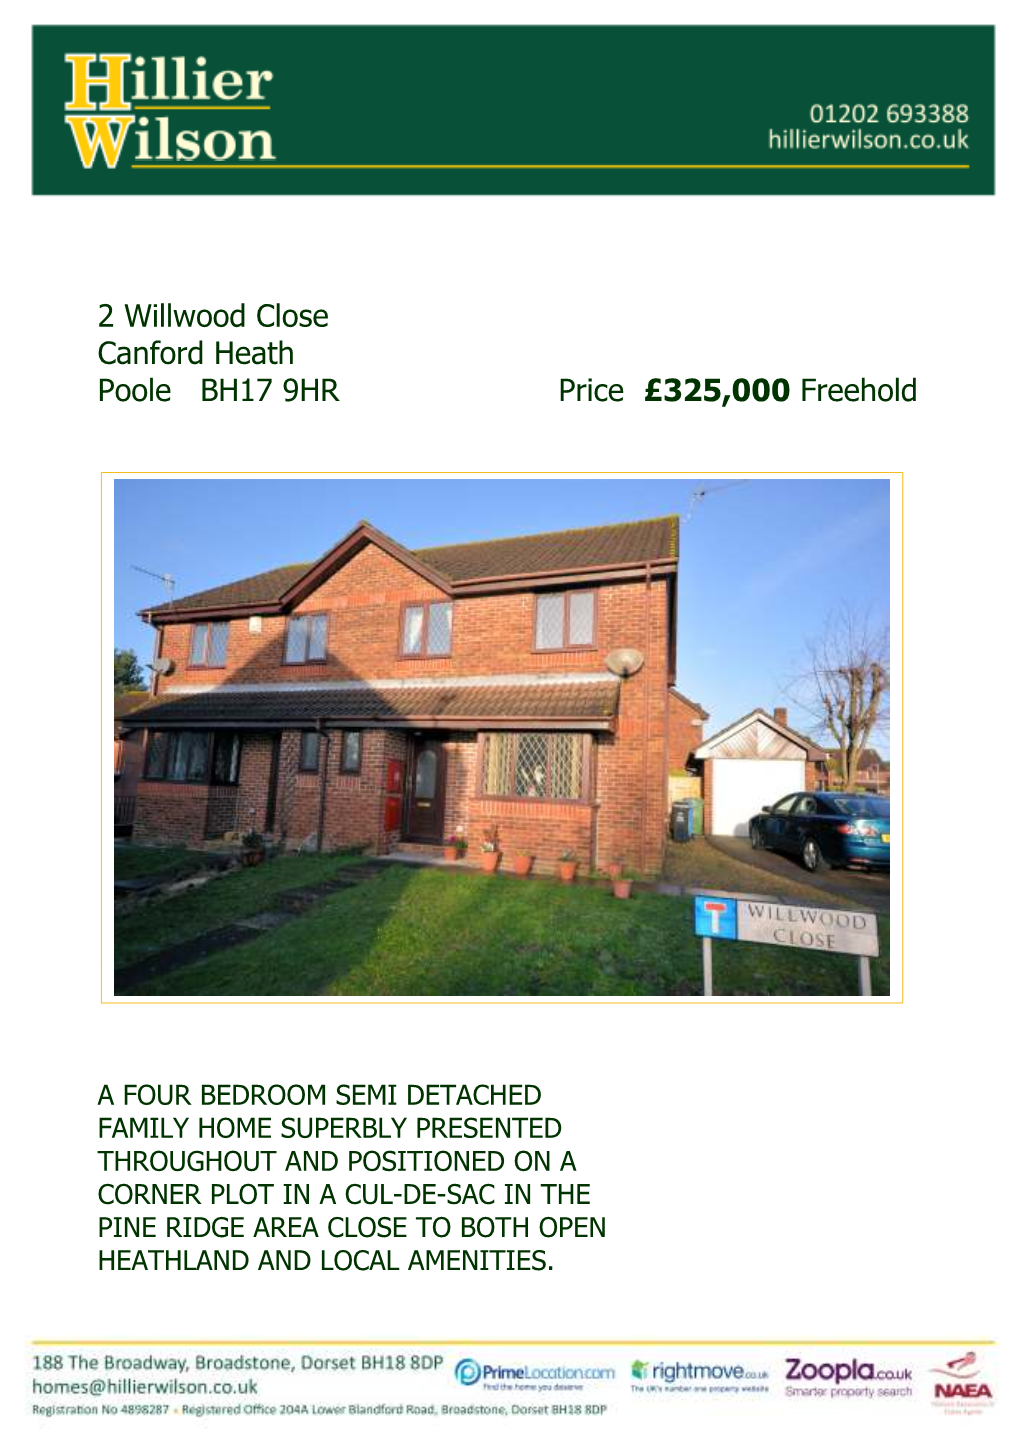 2 Willwood Close Canford Heath Poole BH17 9HR Price £325,000 Freehold